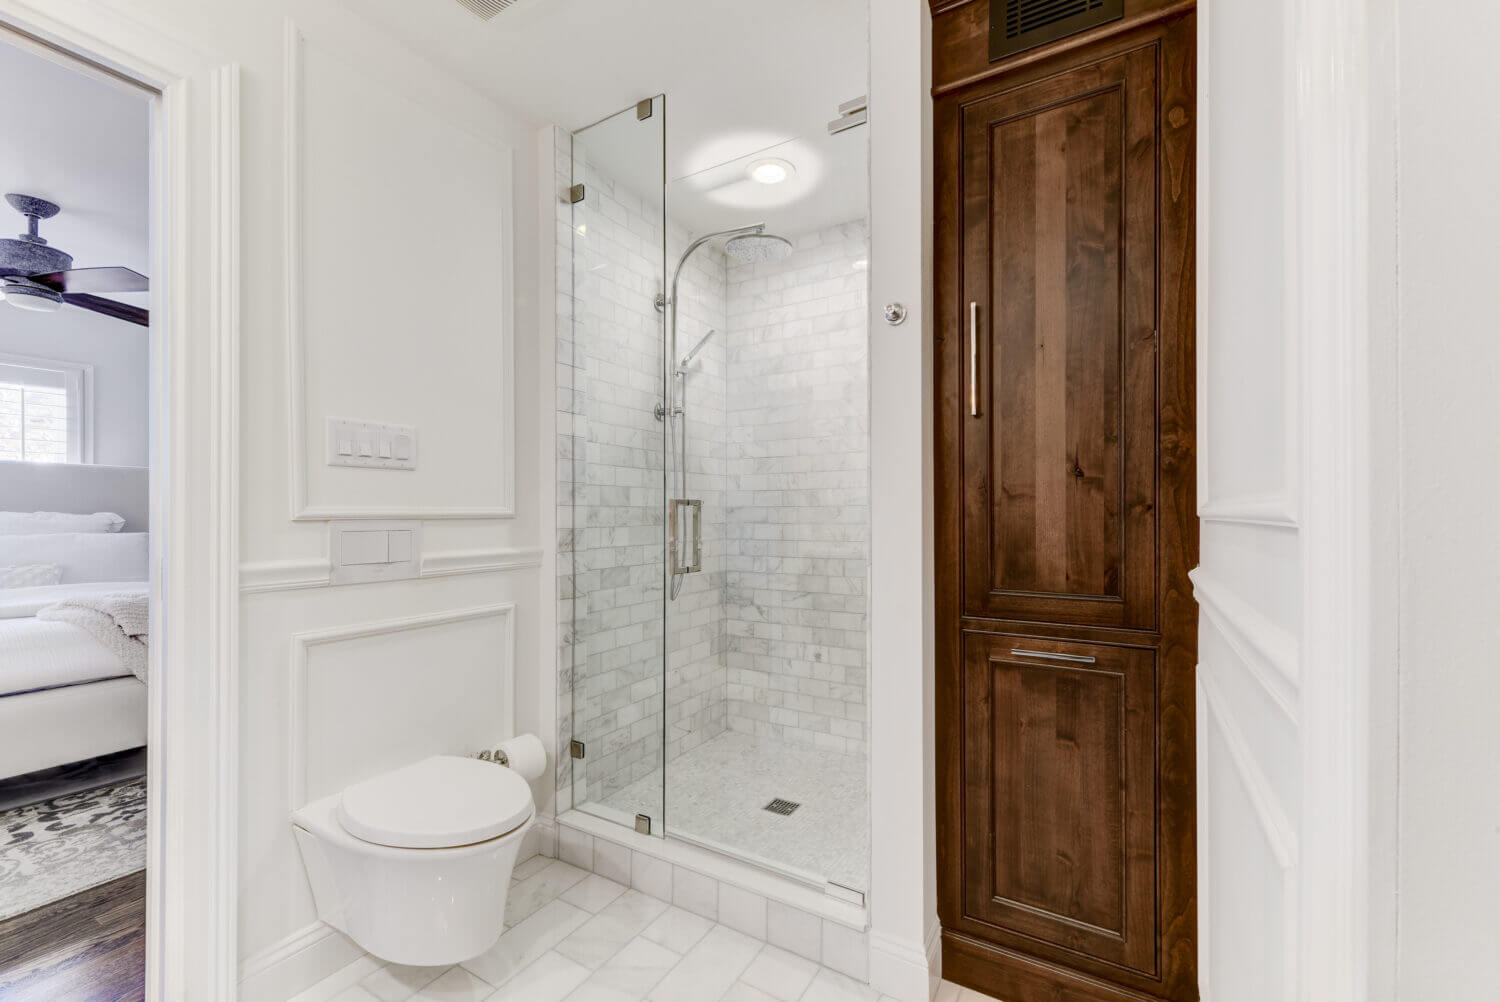 A bright white bathroom with built-in wall inset linen cabinet in a warm stained knotty alder wood. The rustic wood cabinet doors make a beuatiful accent to the all-white color palette.